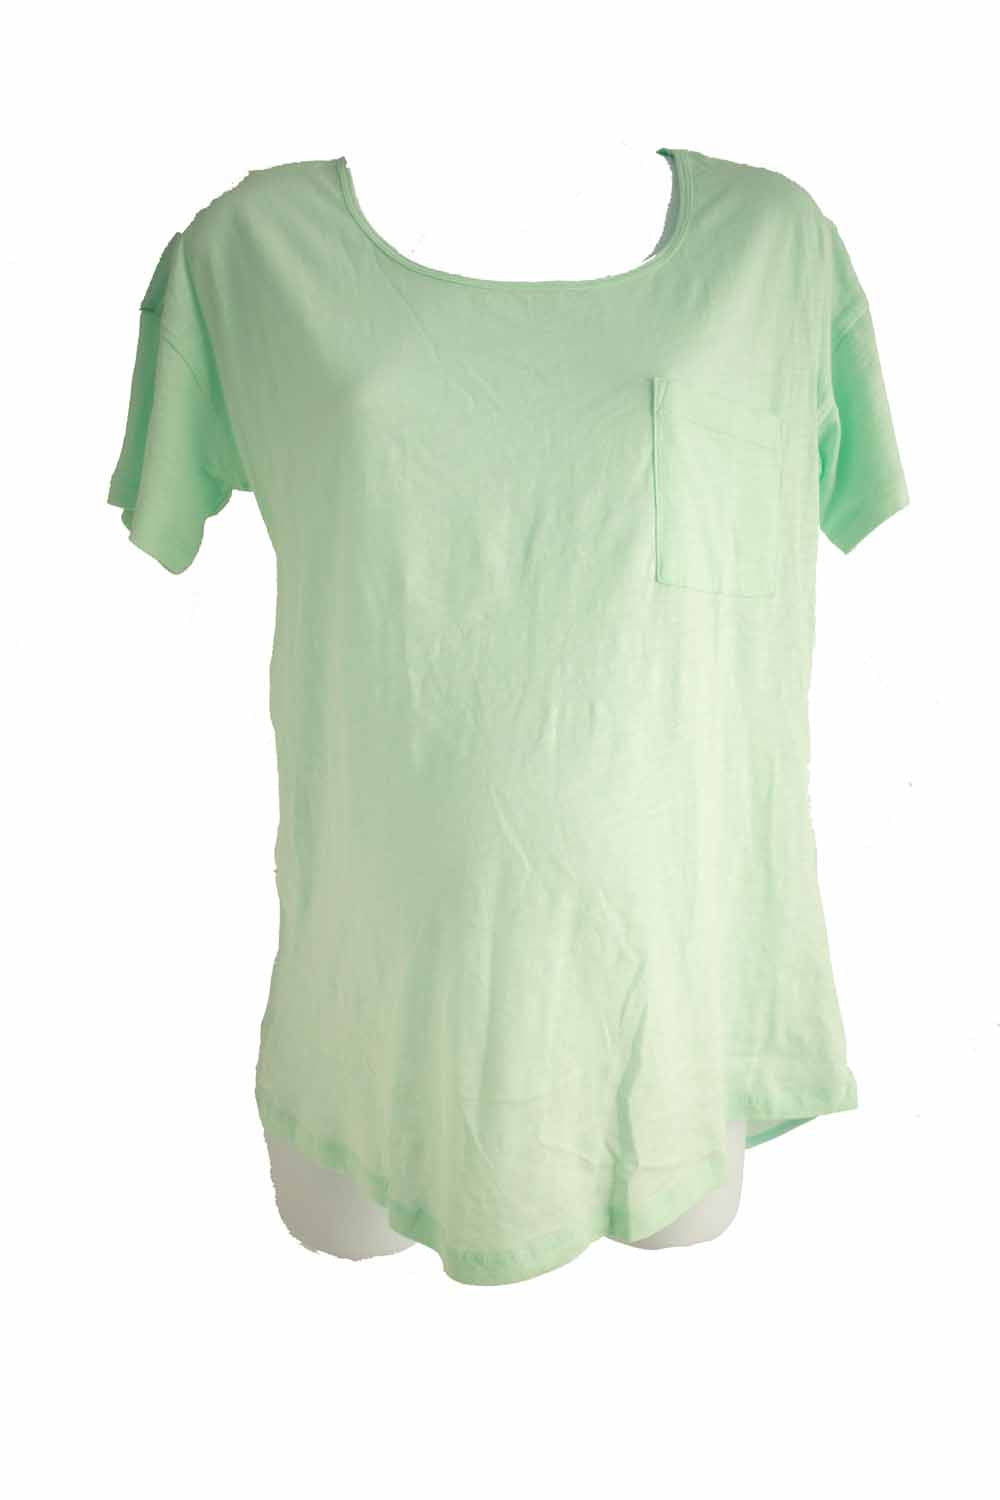 XS *New* Thyme Maternity Short Sleeve Top in Mint Green